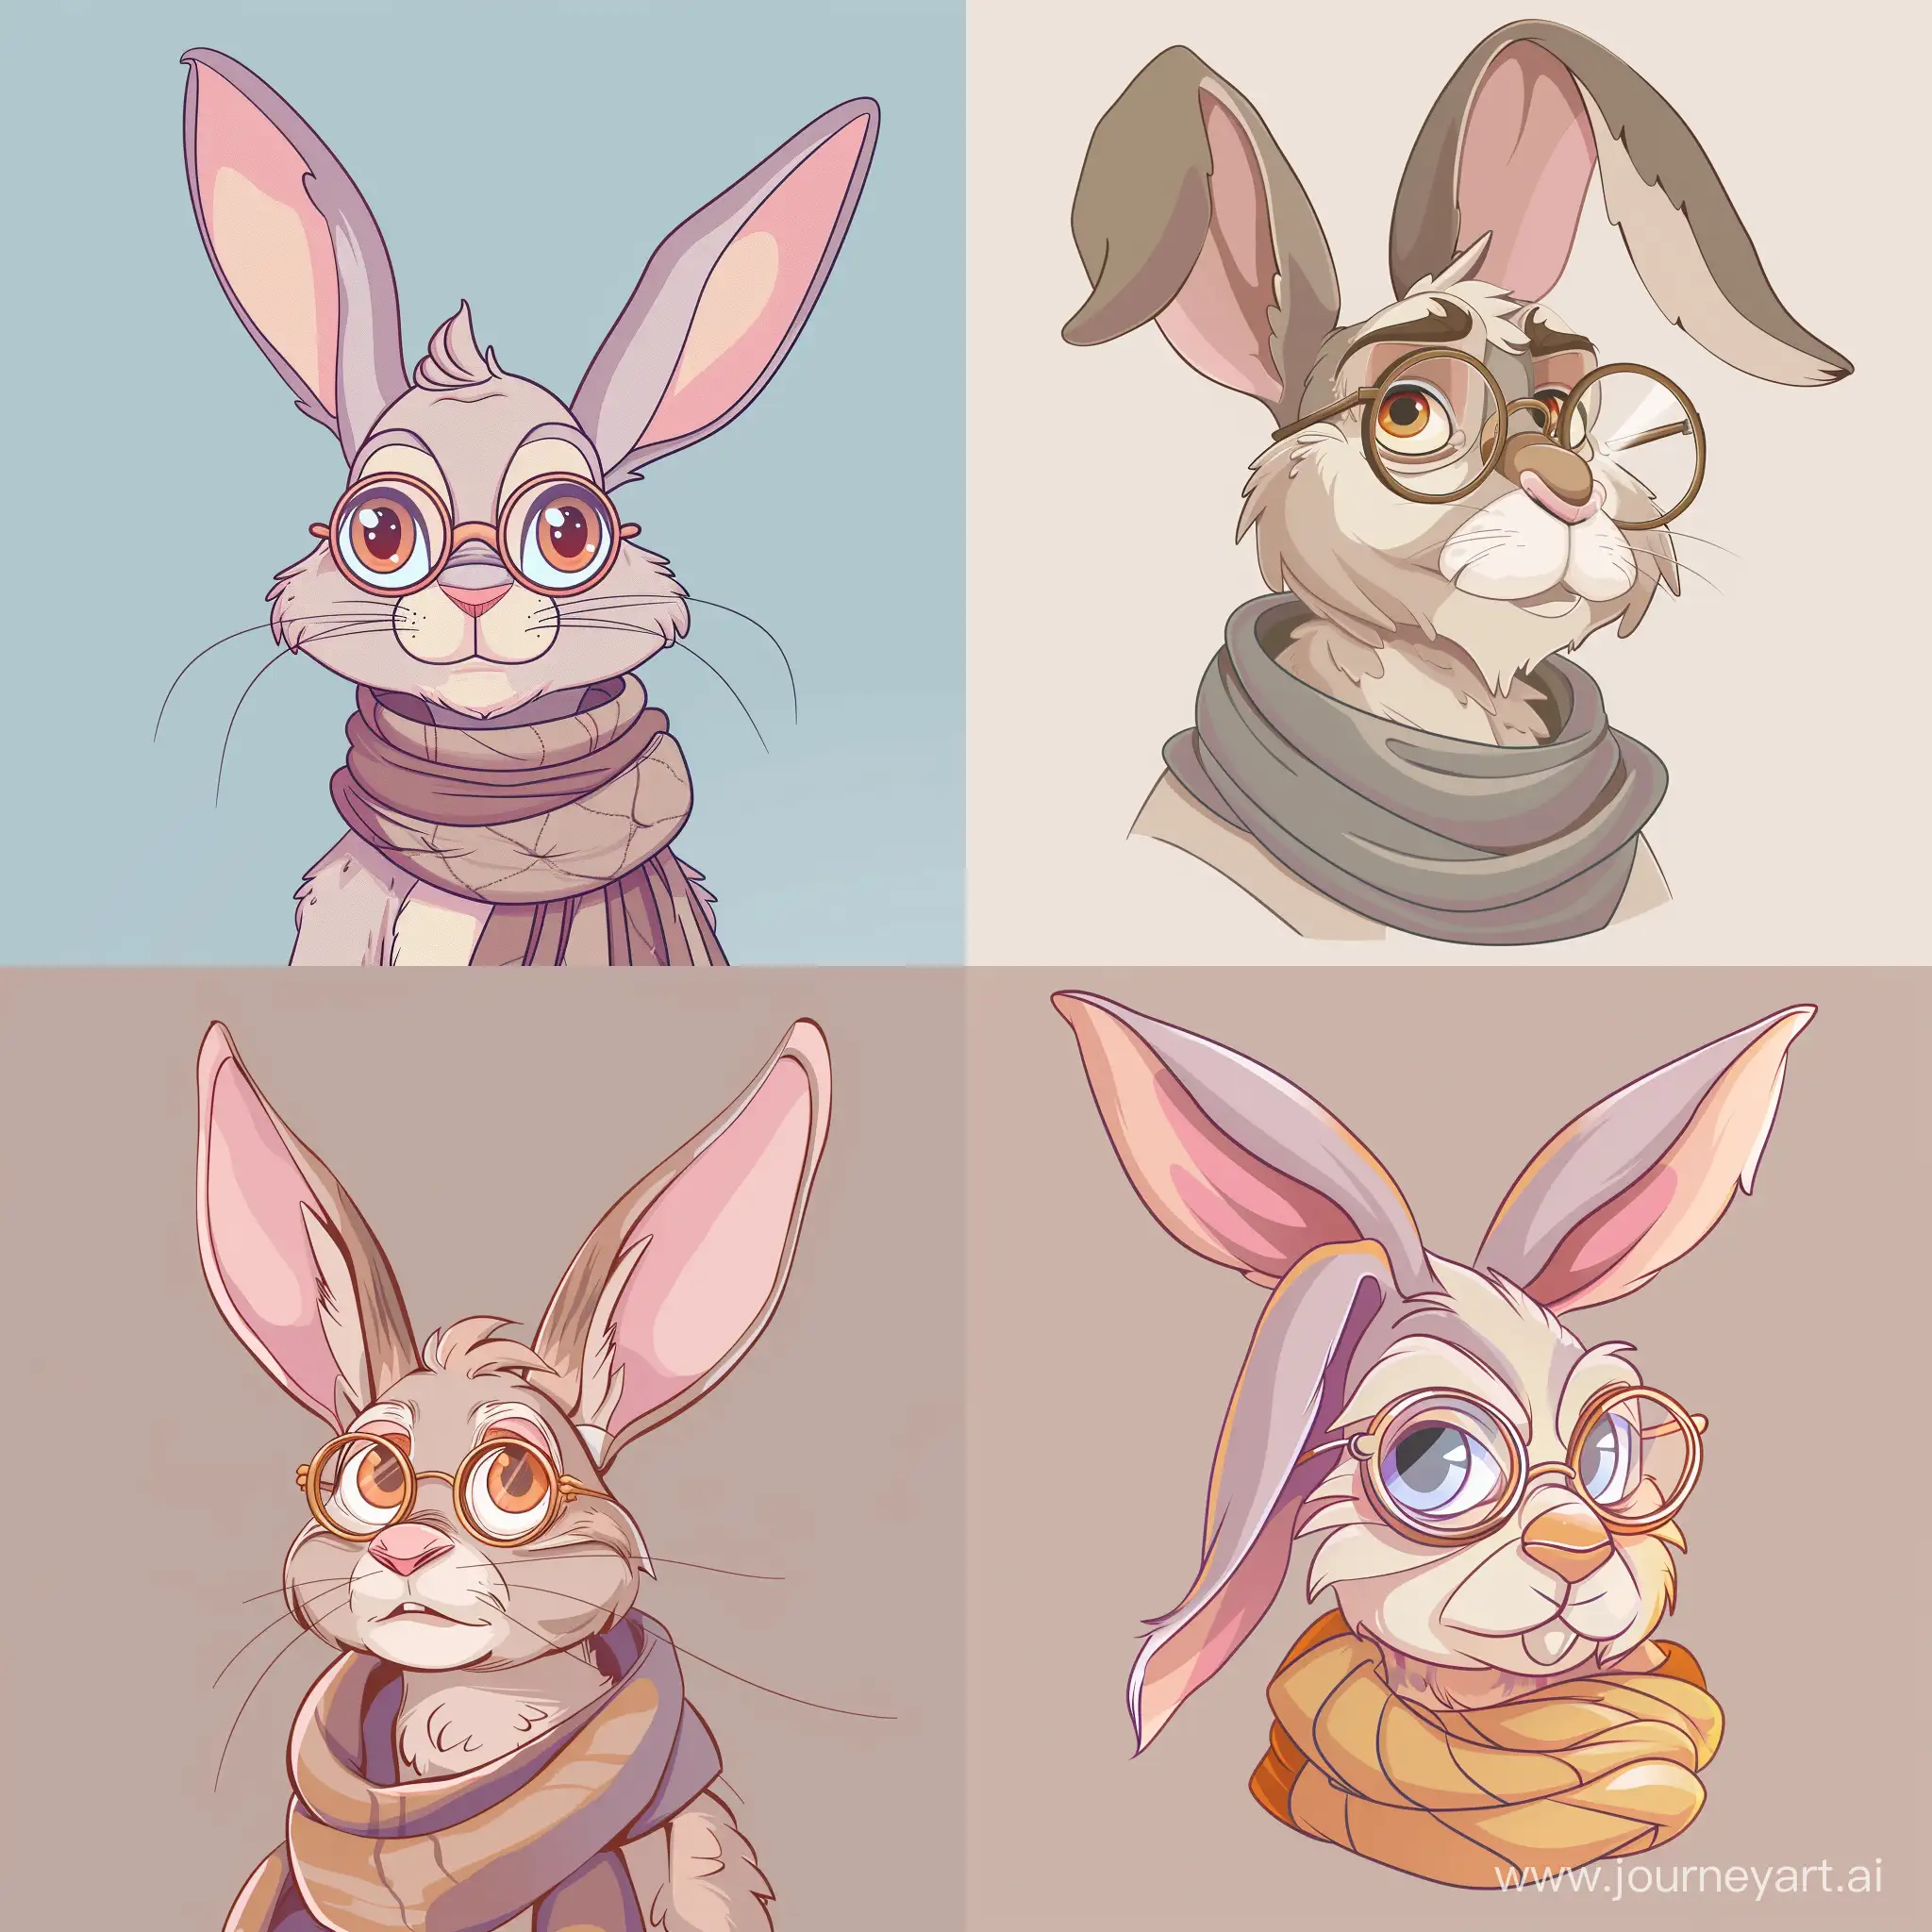 cartoon illustration of An elderly rabbit with wise, gentle eyes and long, floppy ears. The rabbit has a slender build and sports a pair of round spectacles. A cozy scarf is wrapped around its neck, and the inner side of its ears is tinged with pink, in flat style